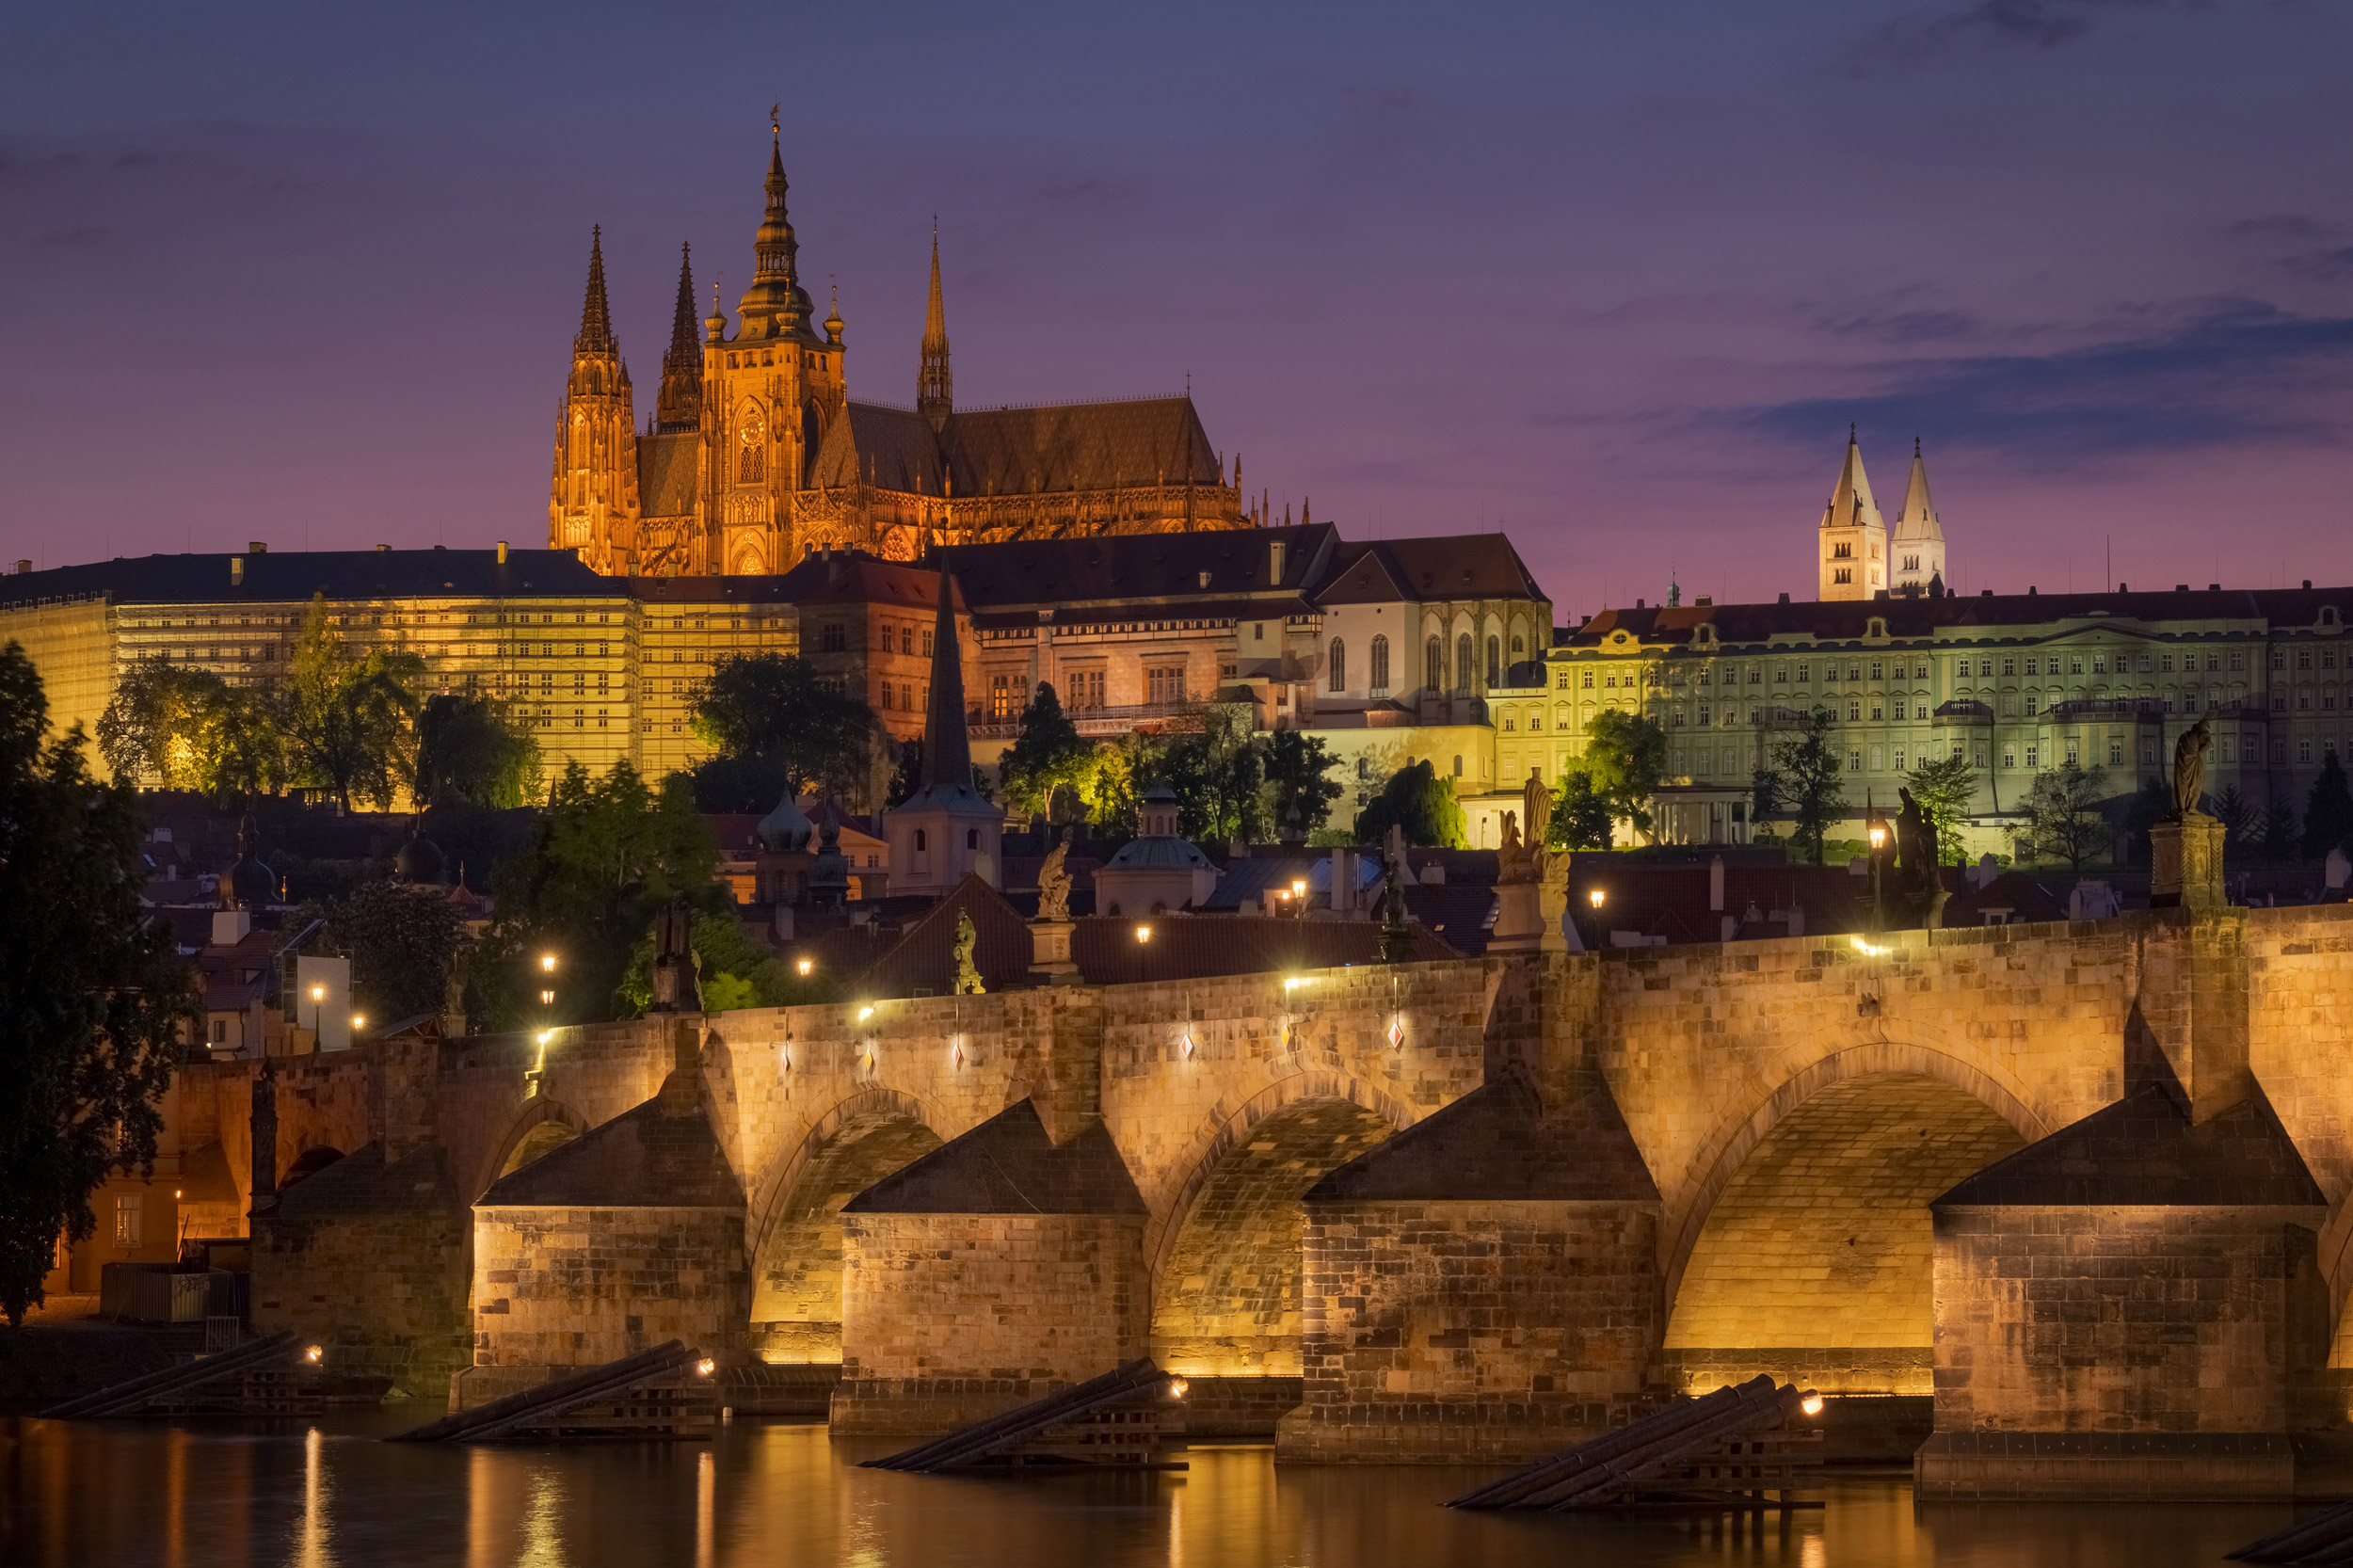 View of the castle and Charles bridge in Prague after the sunset